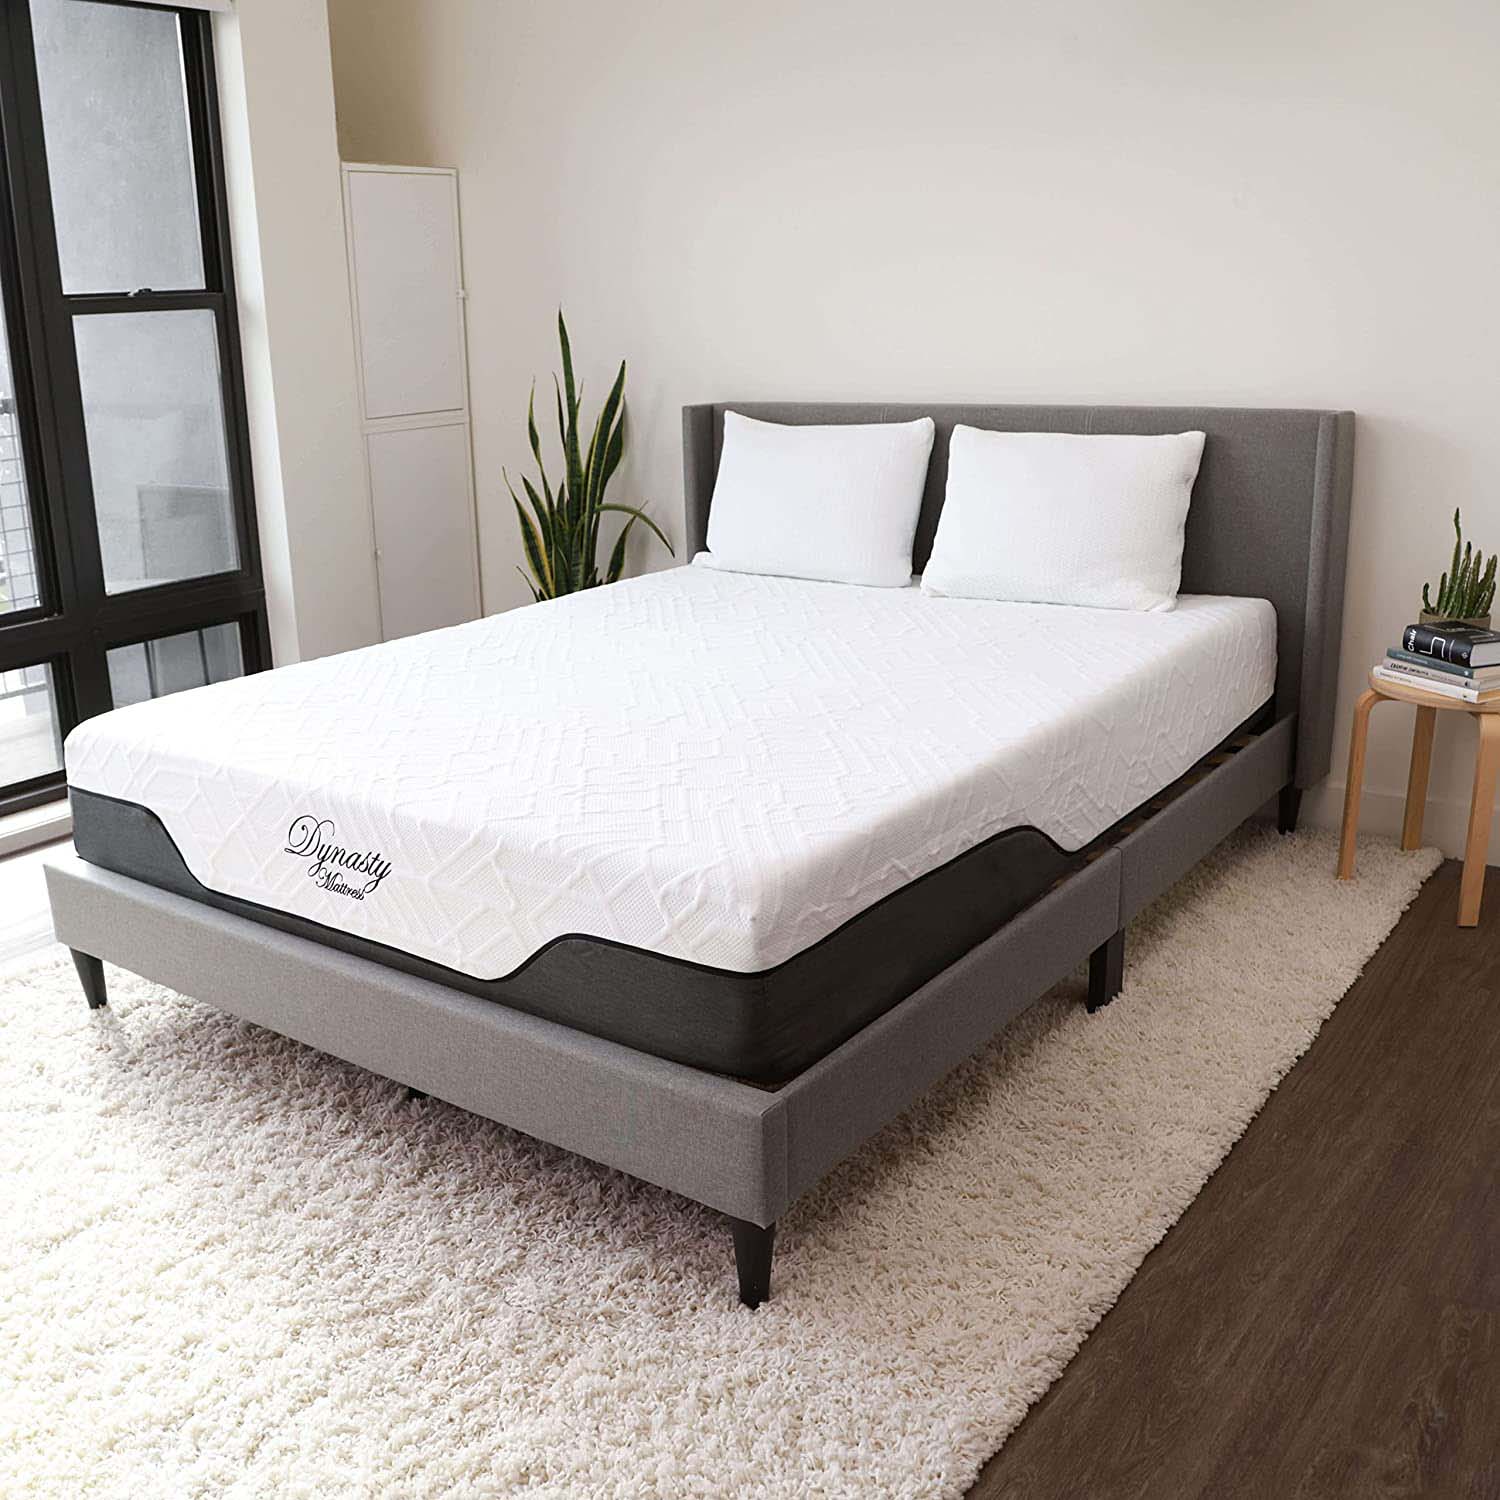 What is the Difference Between Firm and Plush Mattress?